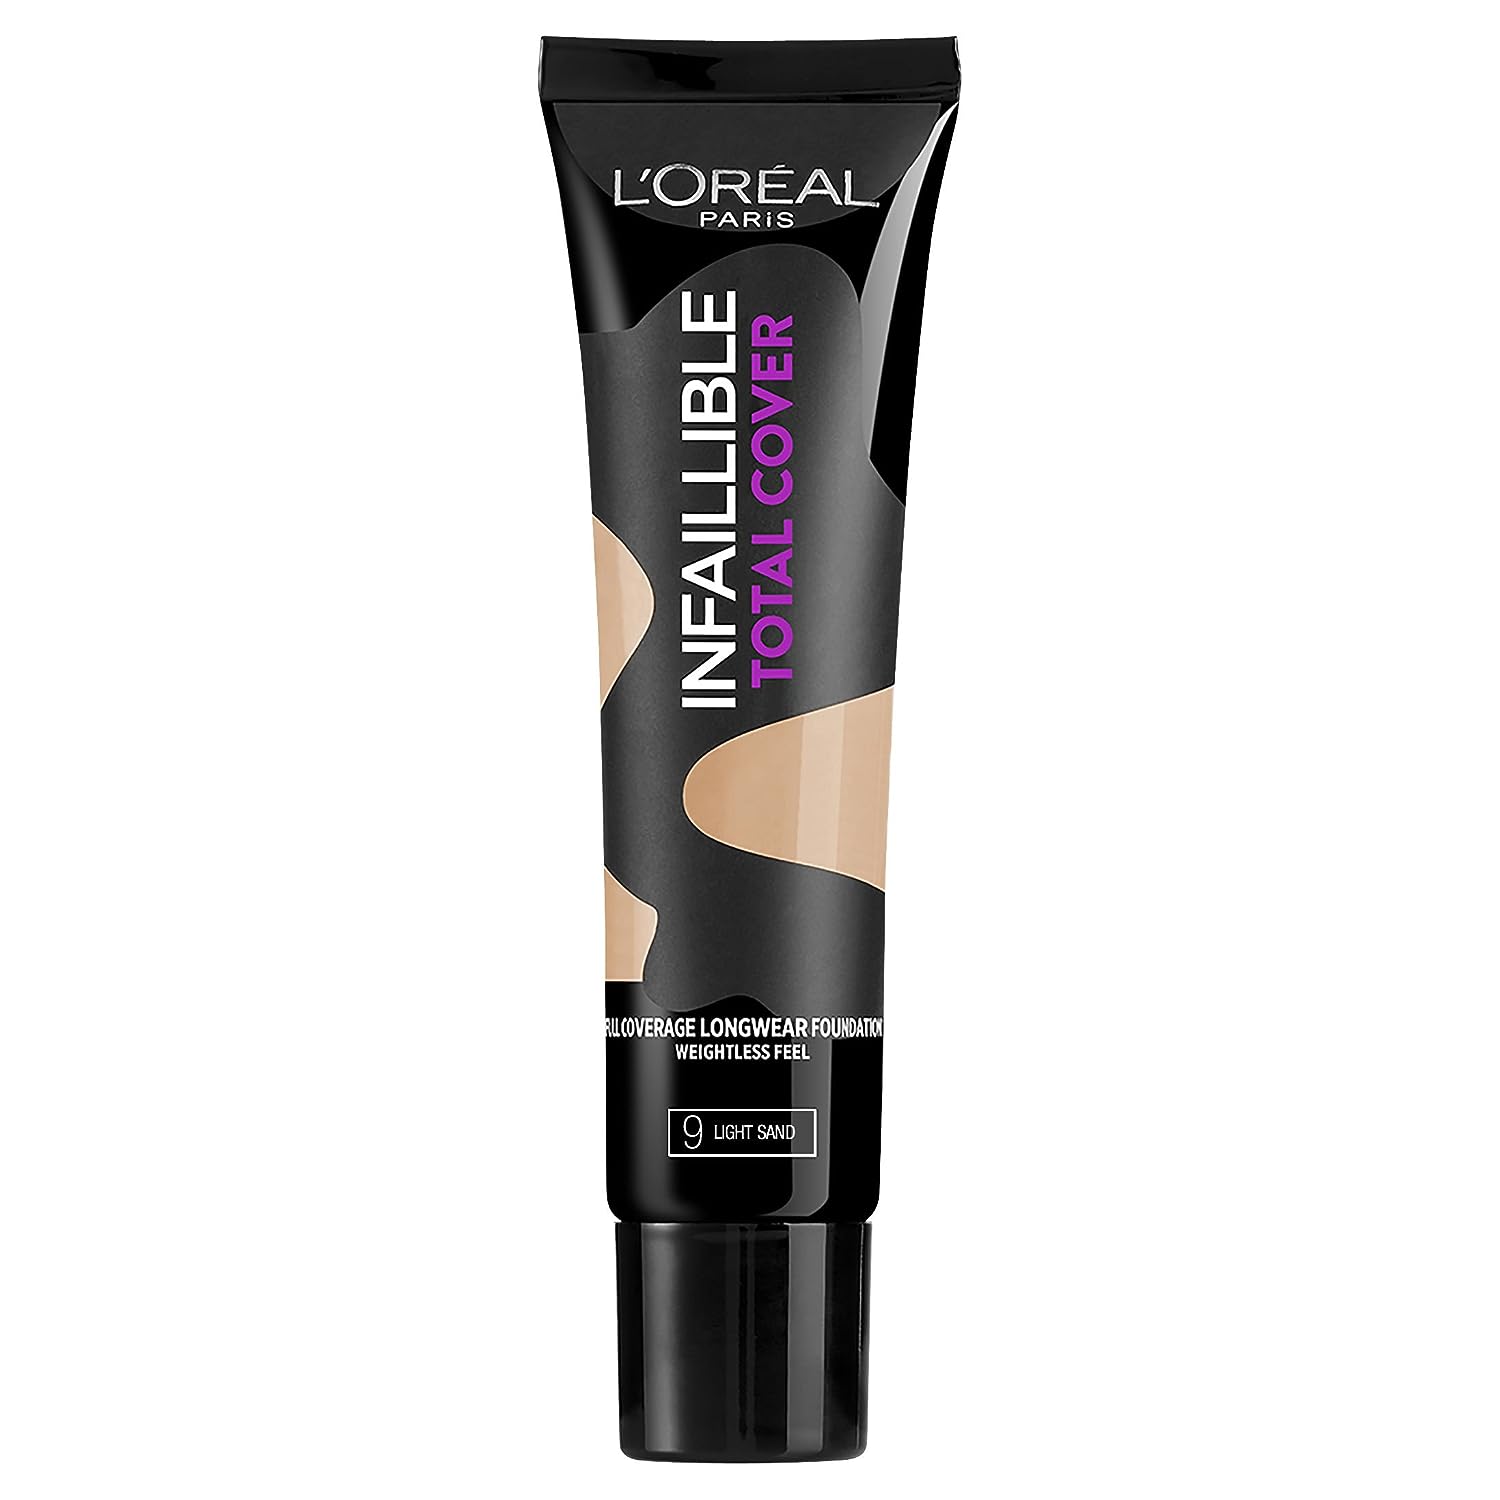 Loreal Infallible Total Cover Foundation - 09 Light - AllurebeautypkLoreal Infallible Total Cover Foundation - 09 Light